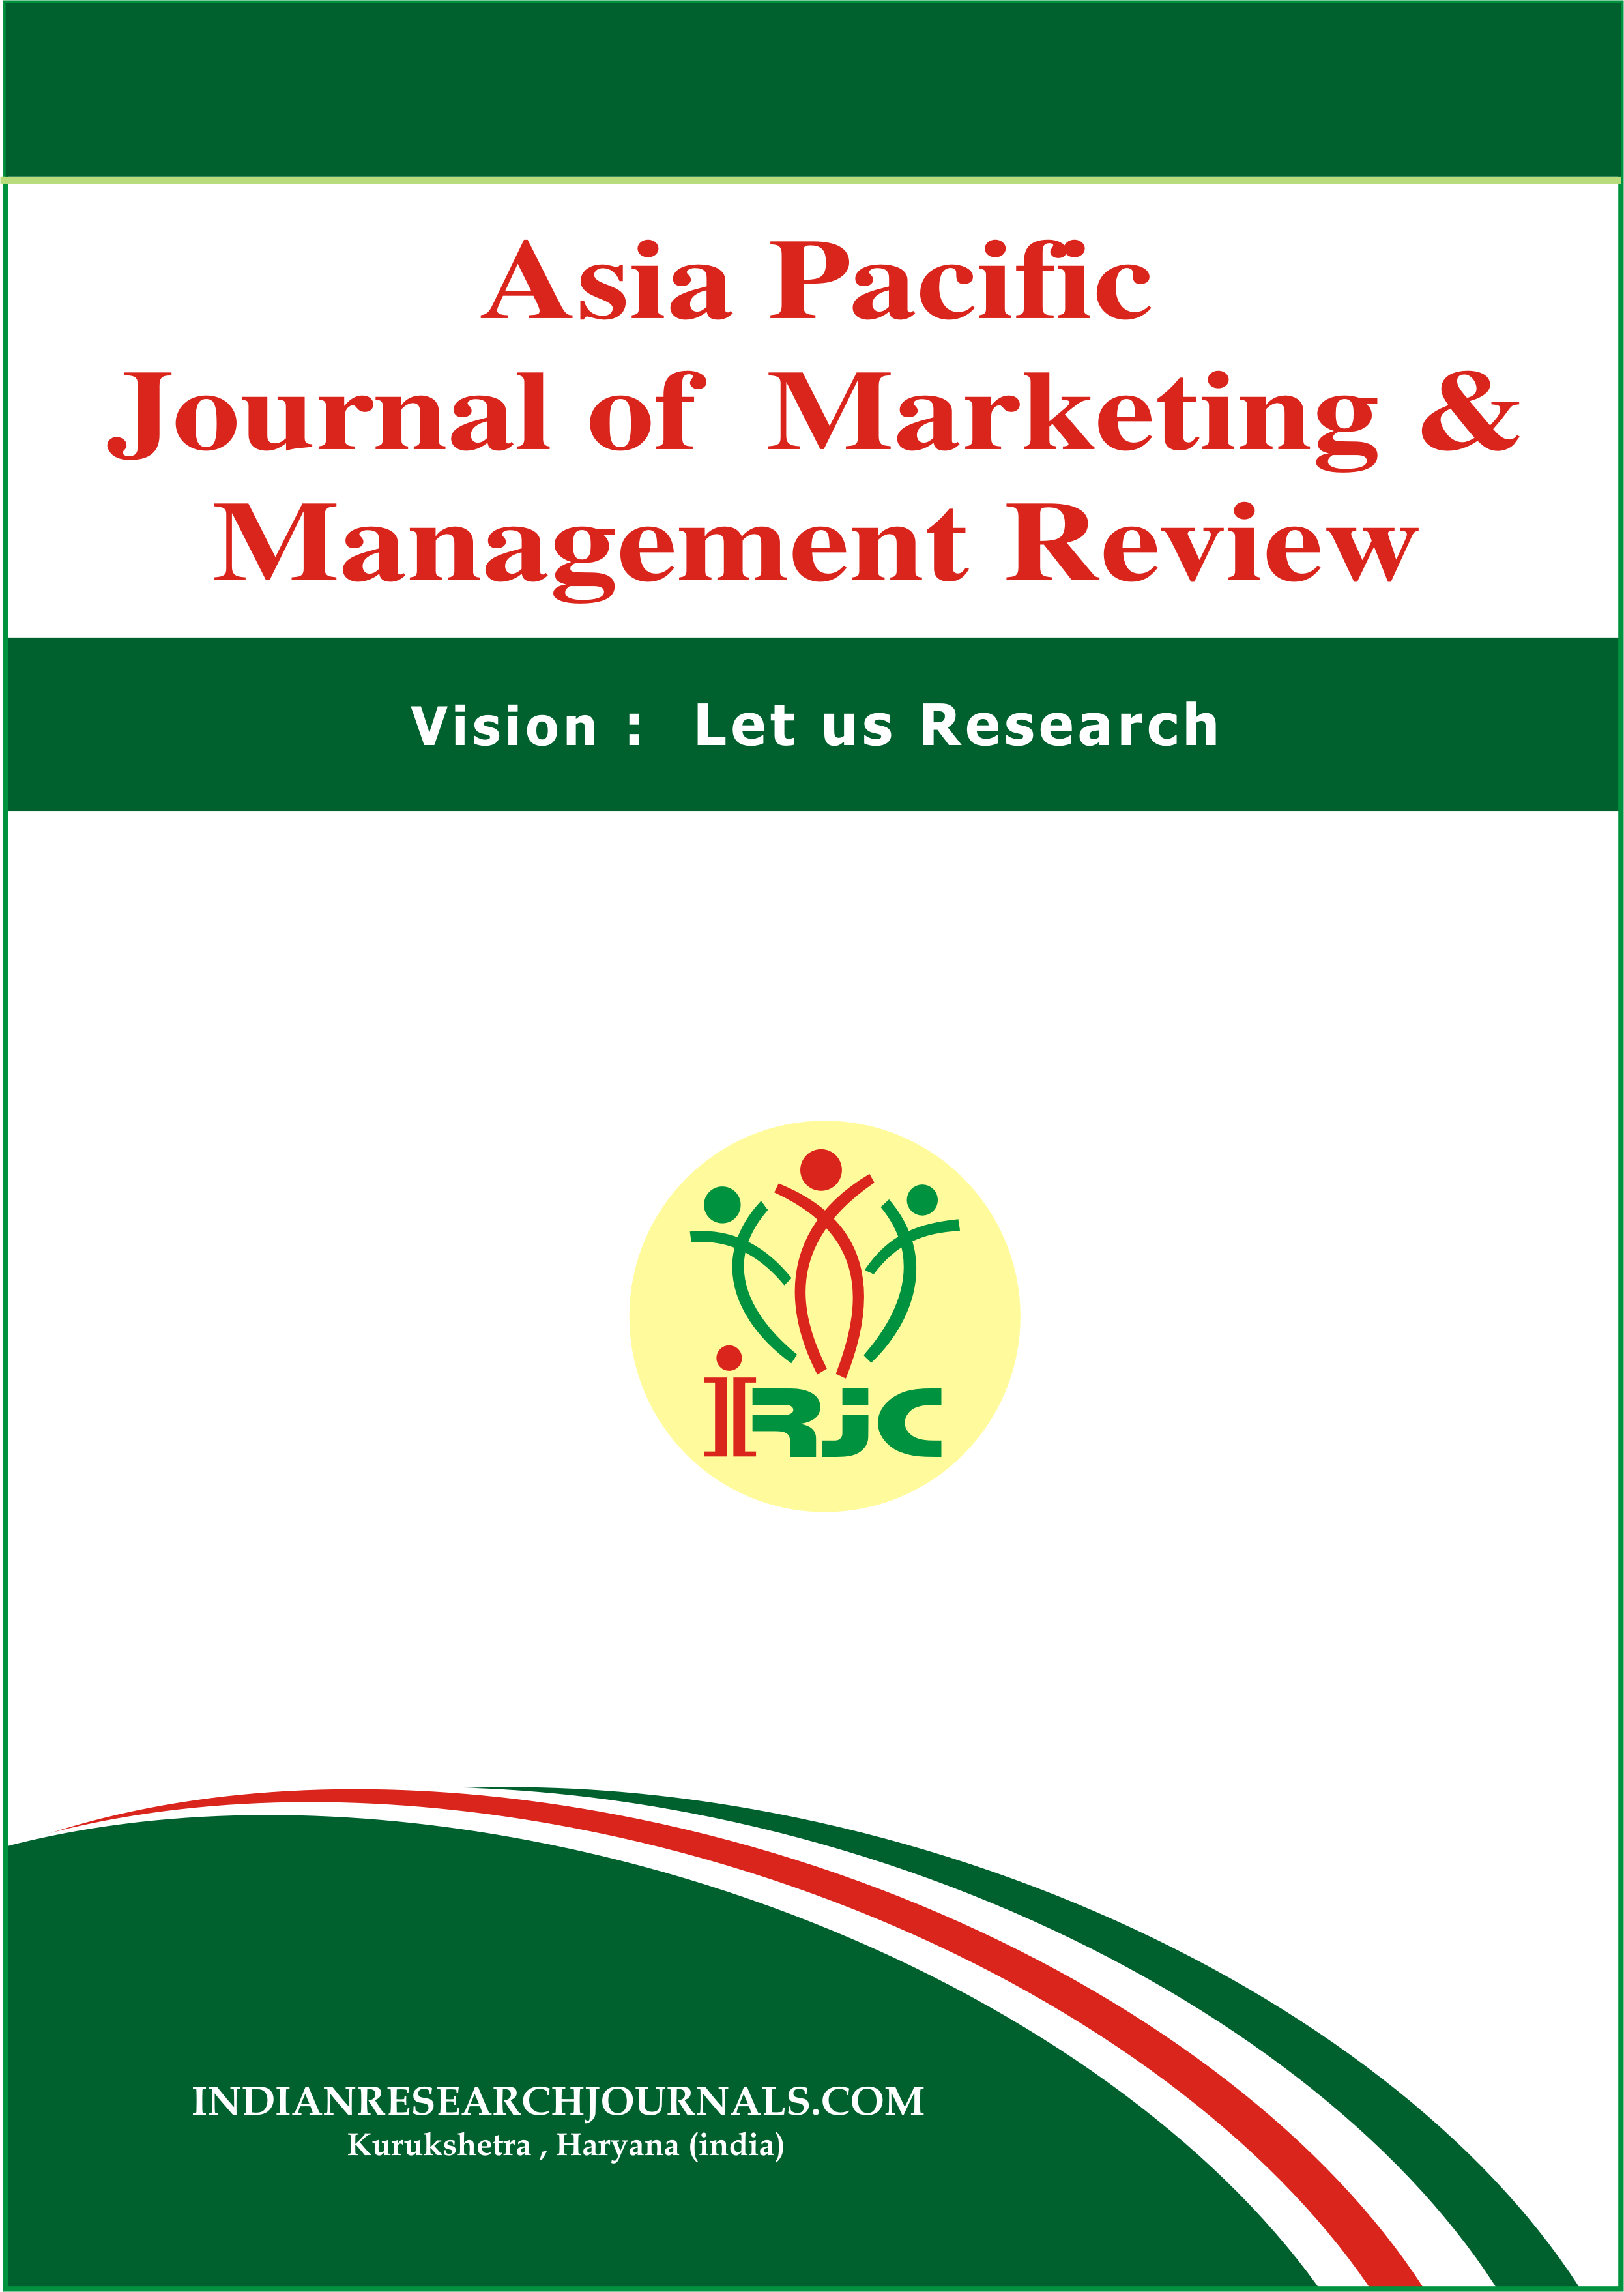 					View Vol. 11 No. 12 (2022):  ASIA PACIFIC JOURNAL OF MARKETING & MANAGEMENT REVIEW
				